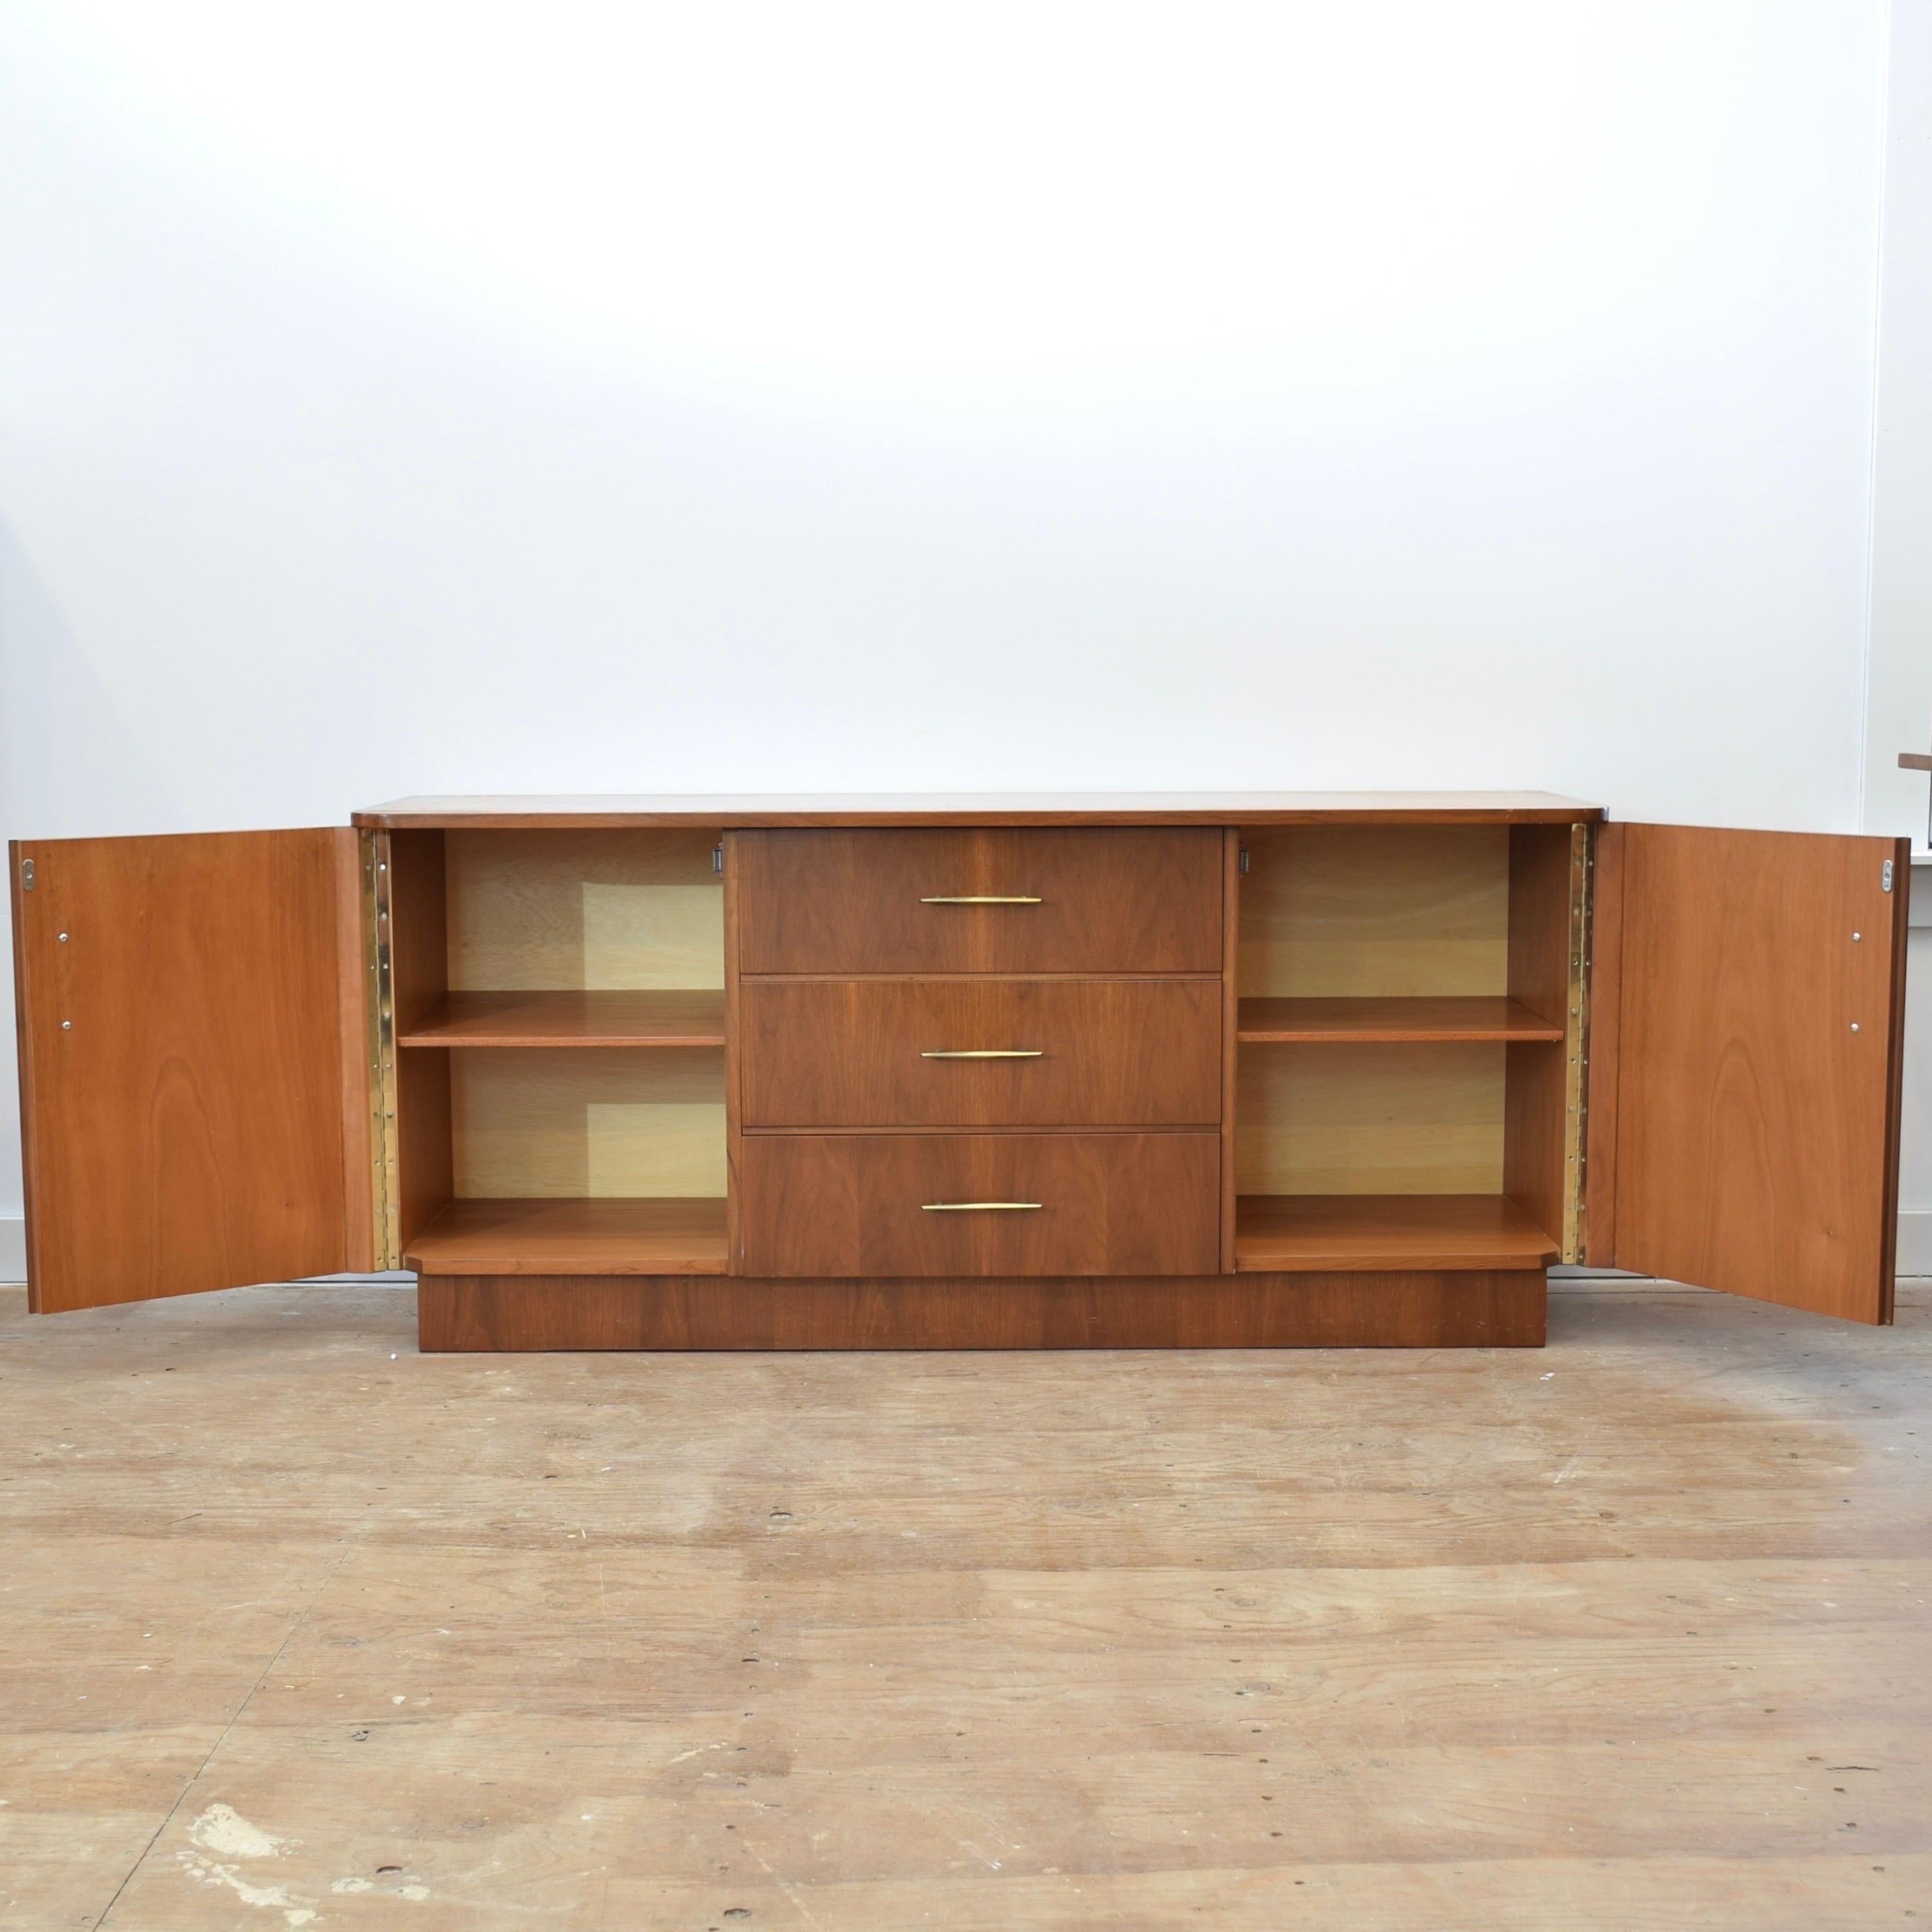 Condition: Excellent Vintage Condition

Dimensions: 59.5” L x 17.5” D x 26.25” H

Description: A vintage walnut sideboard. Custom made by a German cabinet maker, circa 1970s. In excellent condition with great quality construction. 